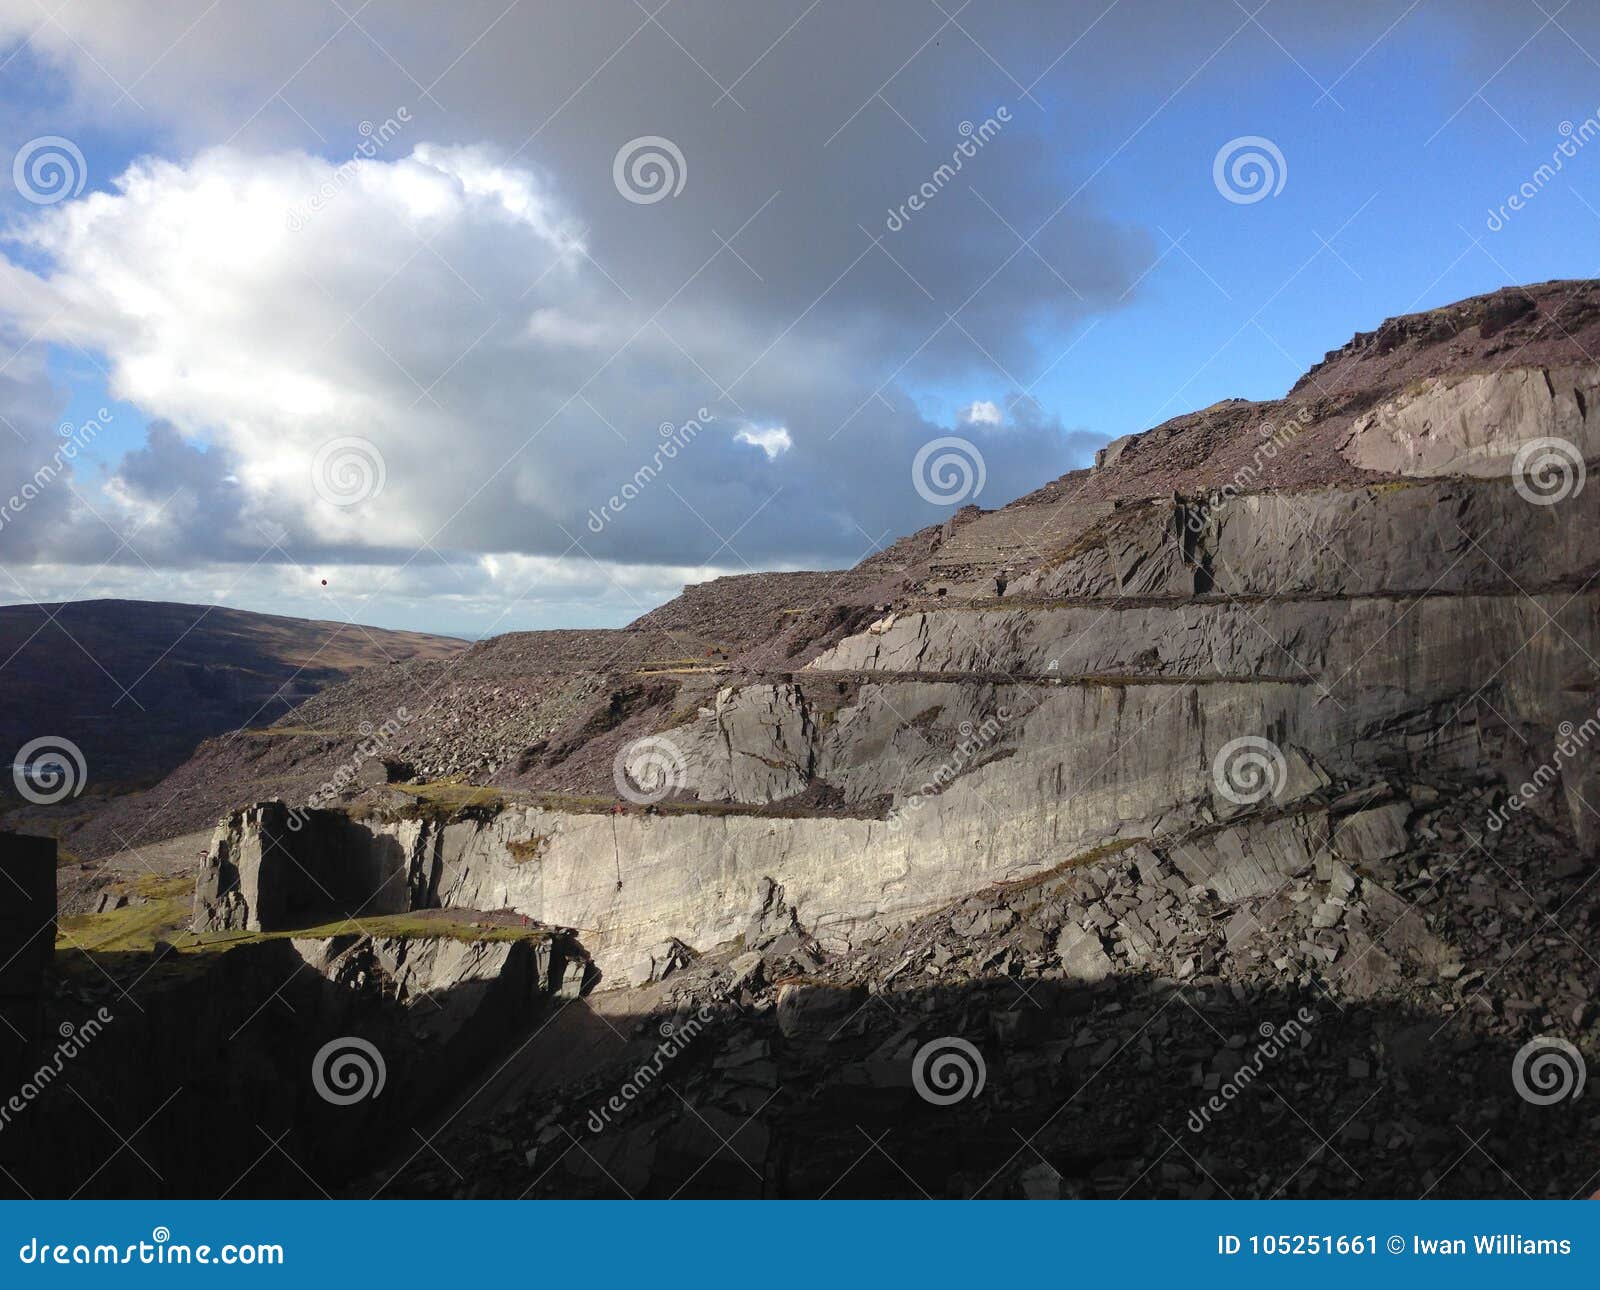 windy in a welsh quarry hd sex photo